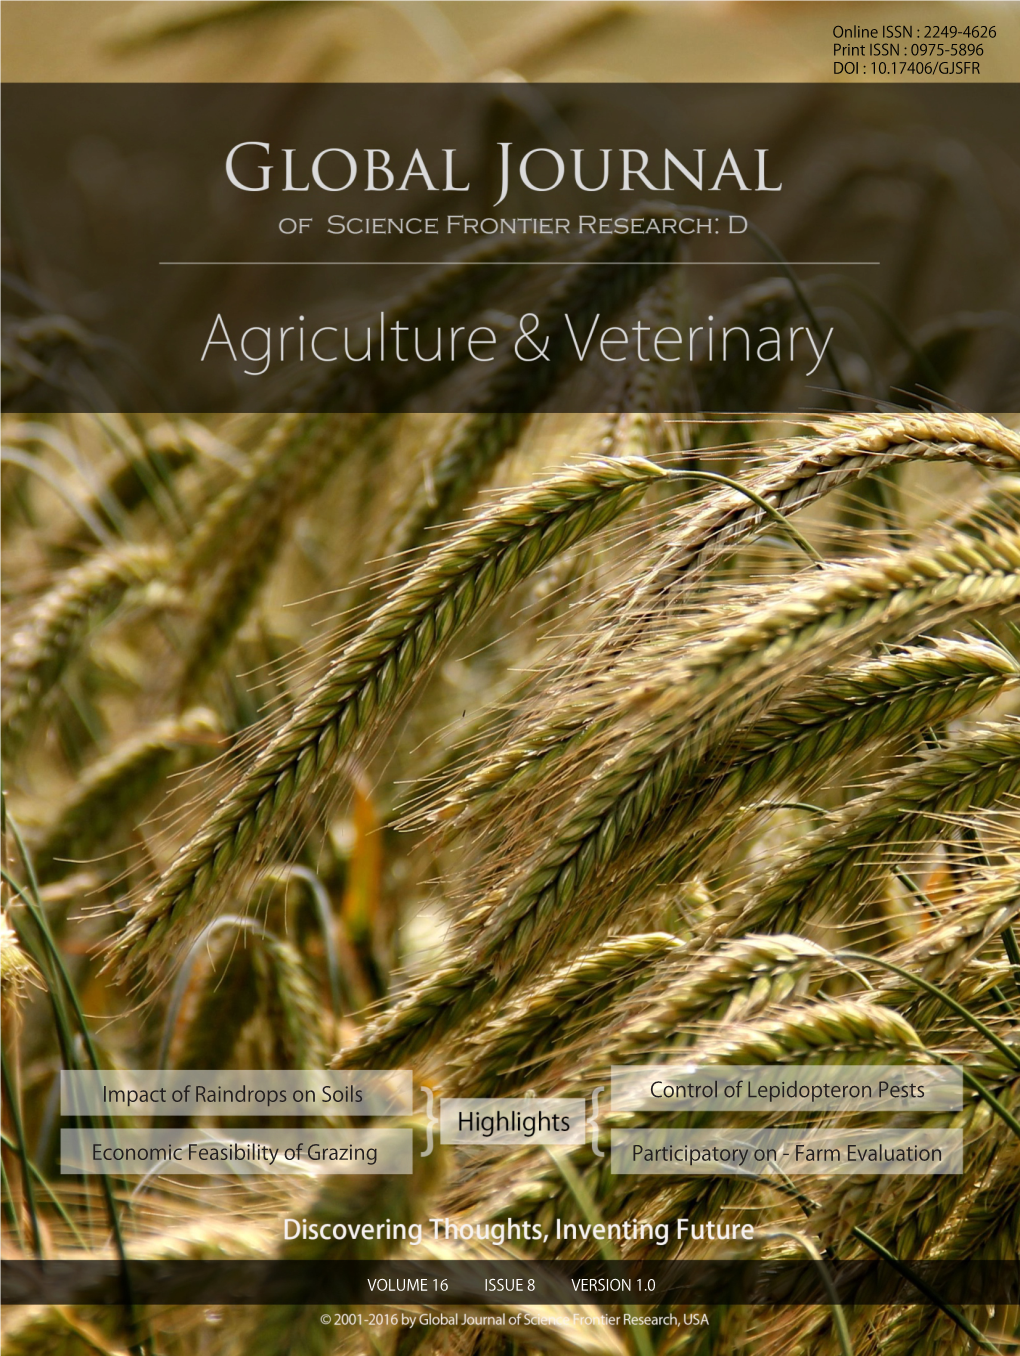 Global Journal of Science Frontier Research: D Agriculture & Veterinary